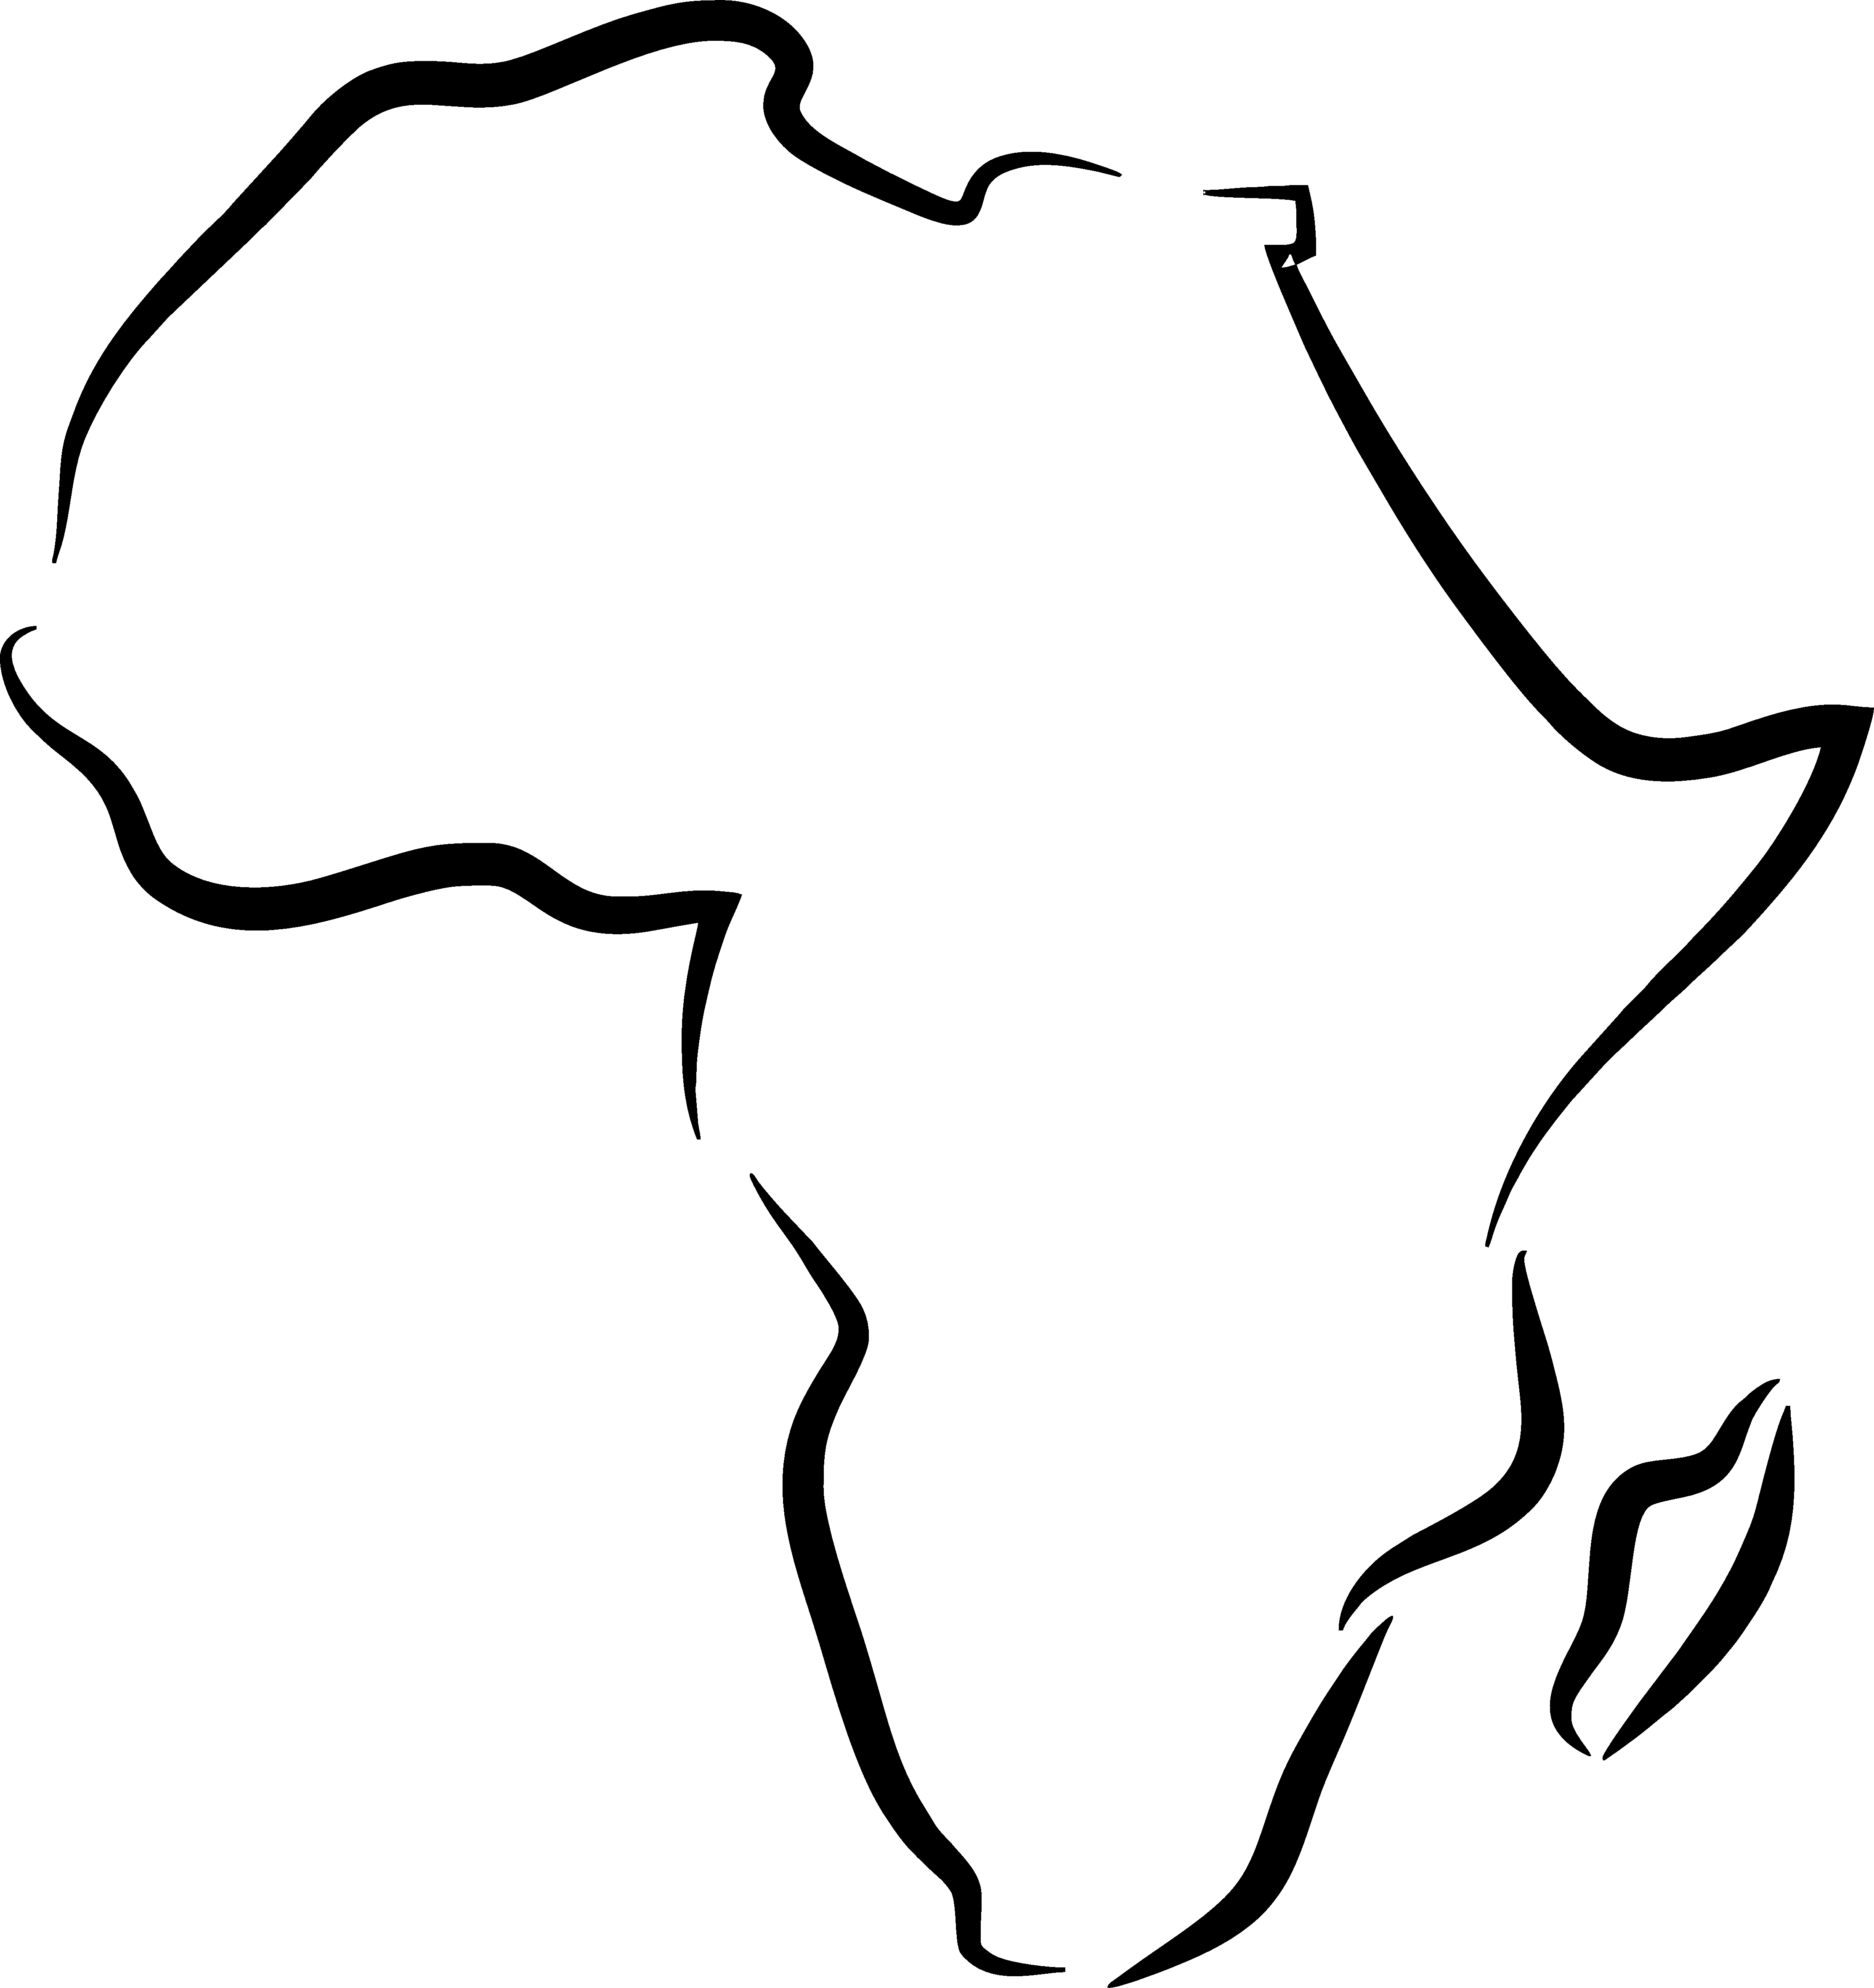 Global african map clipart black and white